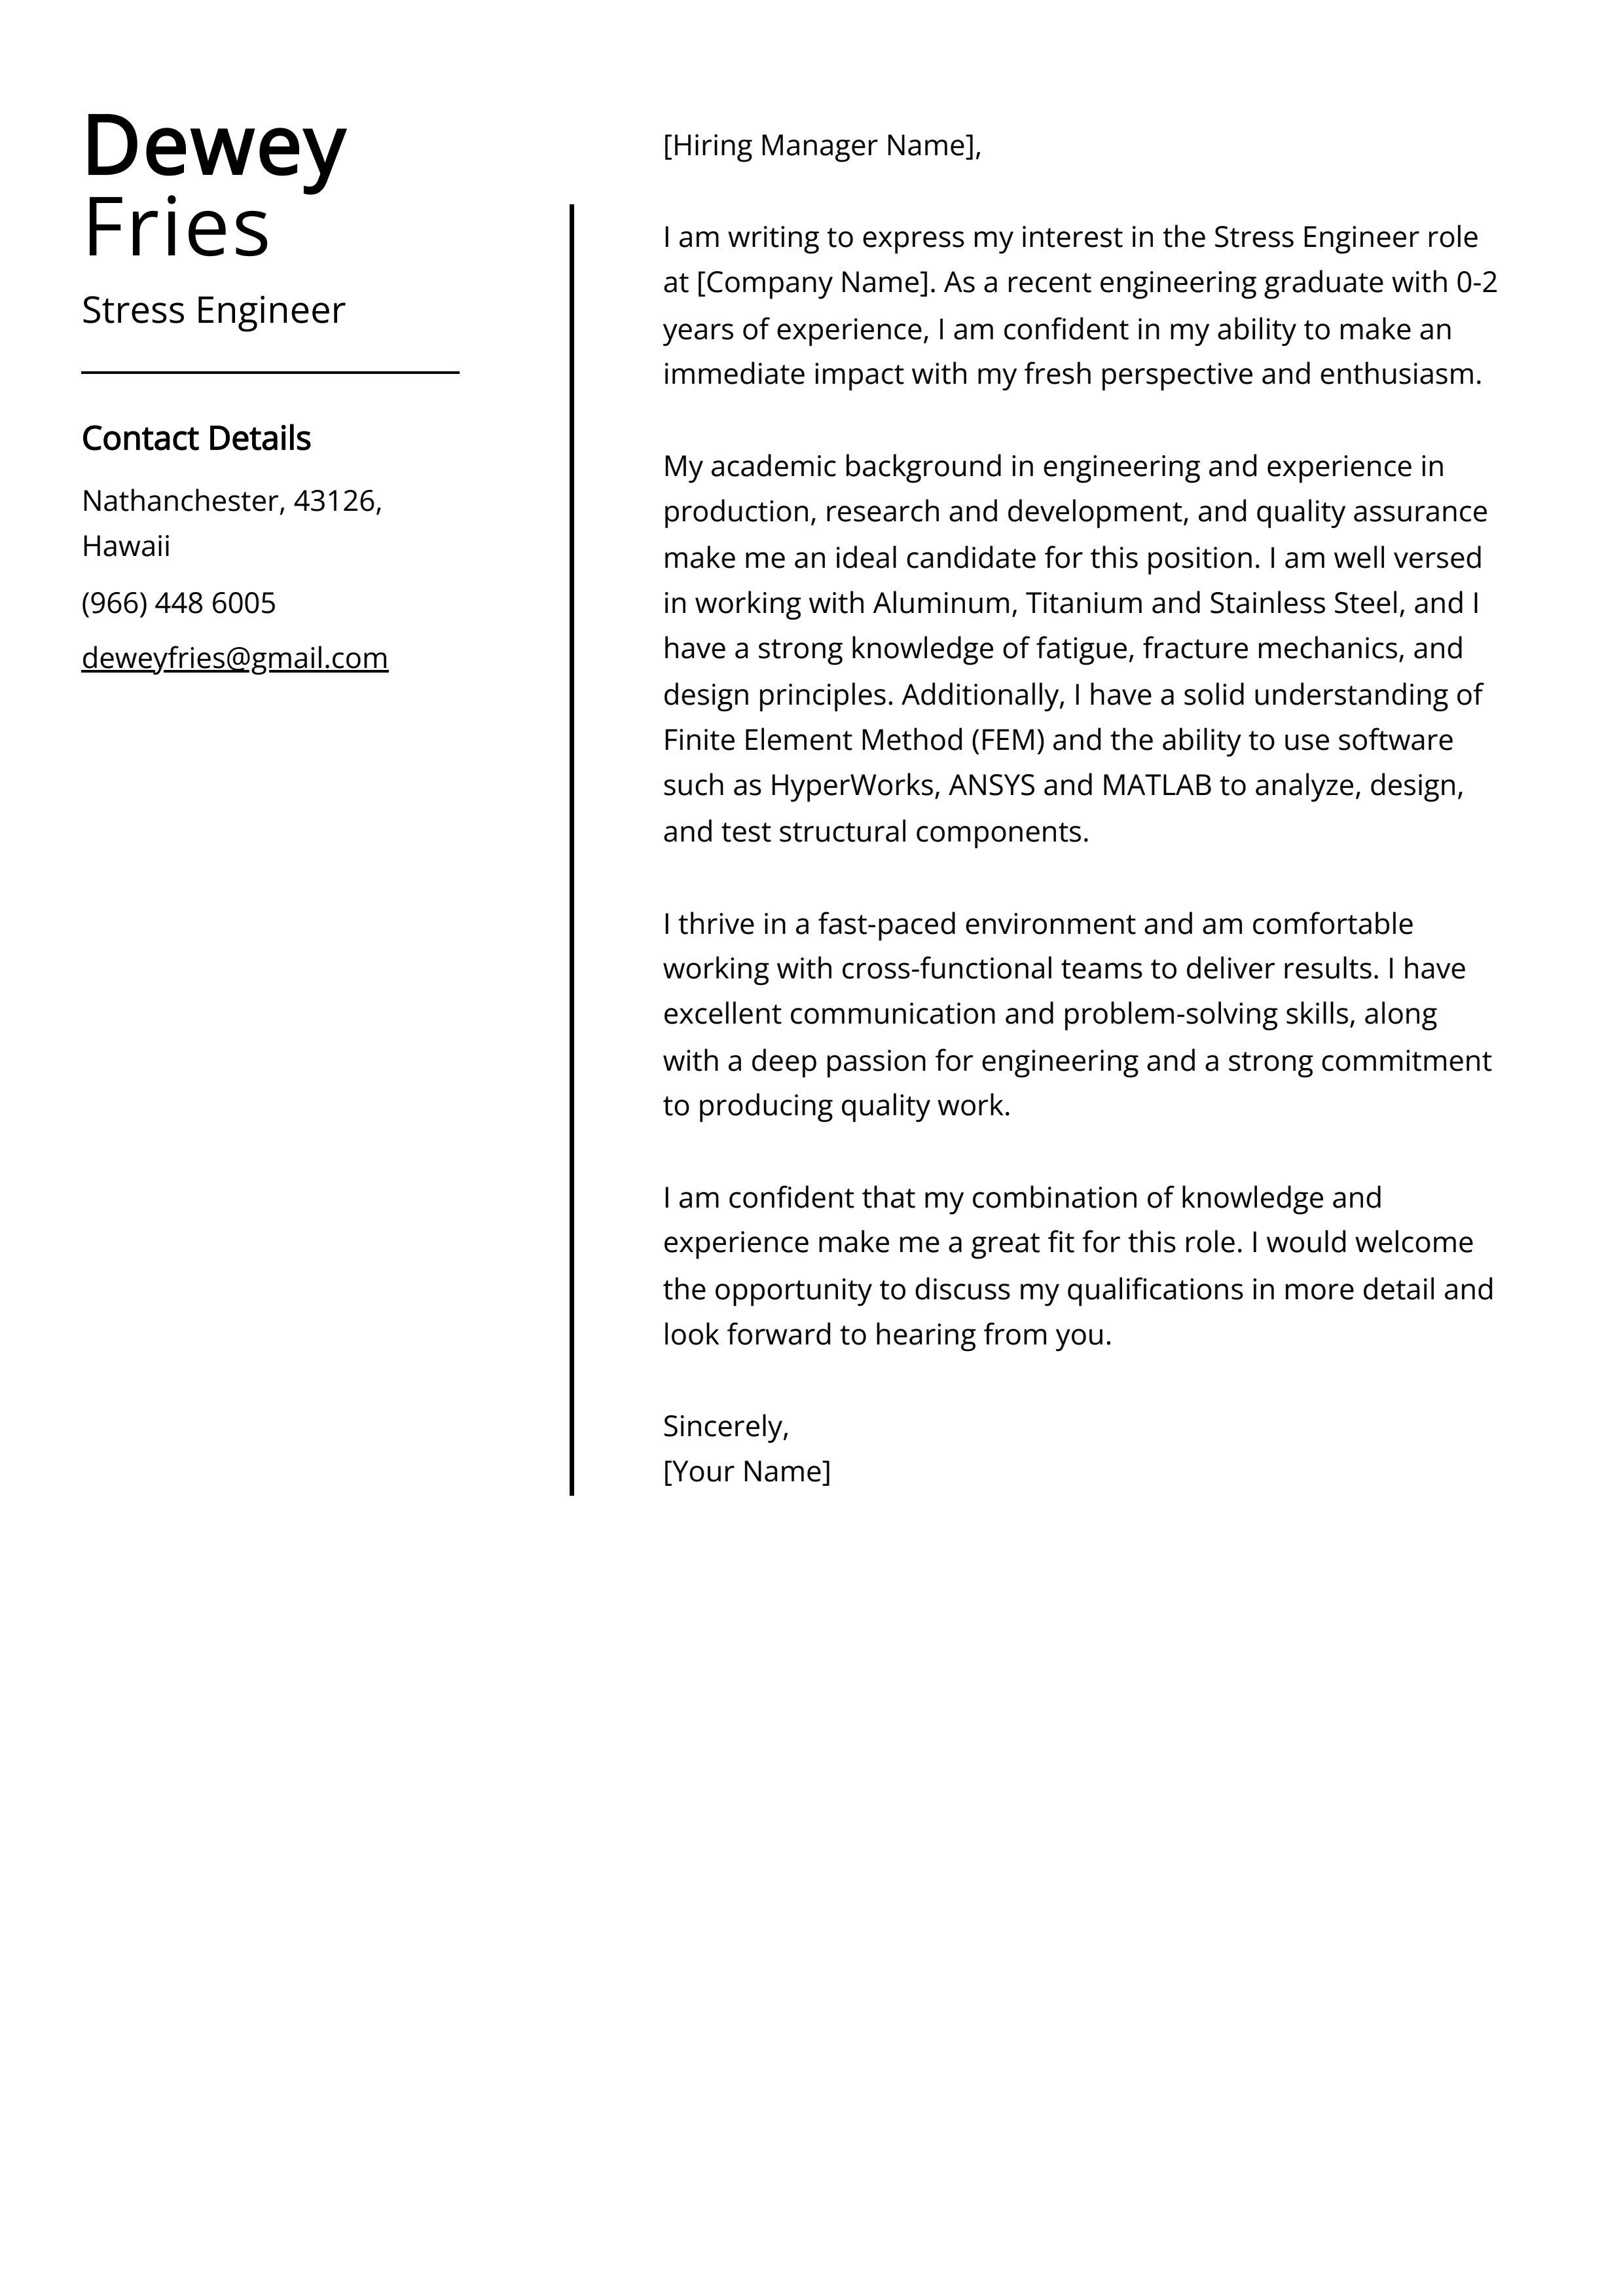 Stress Engineer Cover Letter Example